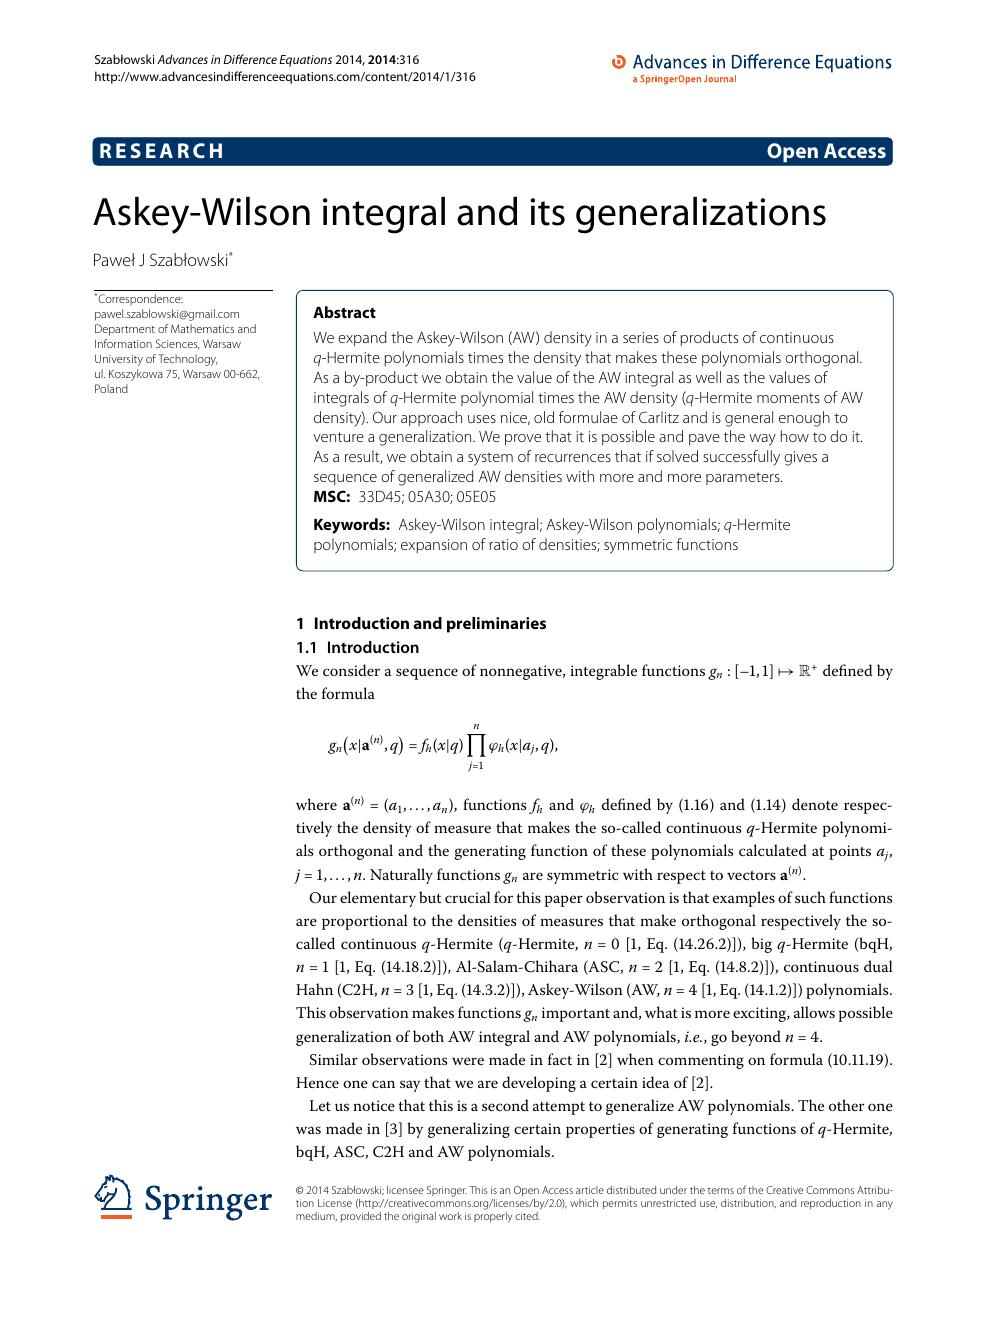 Askey Wilson Integral And Its Generalizations Topic Of Research Paper In Mathematics Download Scholarly Article Pdf And Read For Free On Cyberleninka Open Science Hub